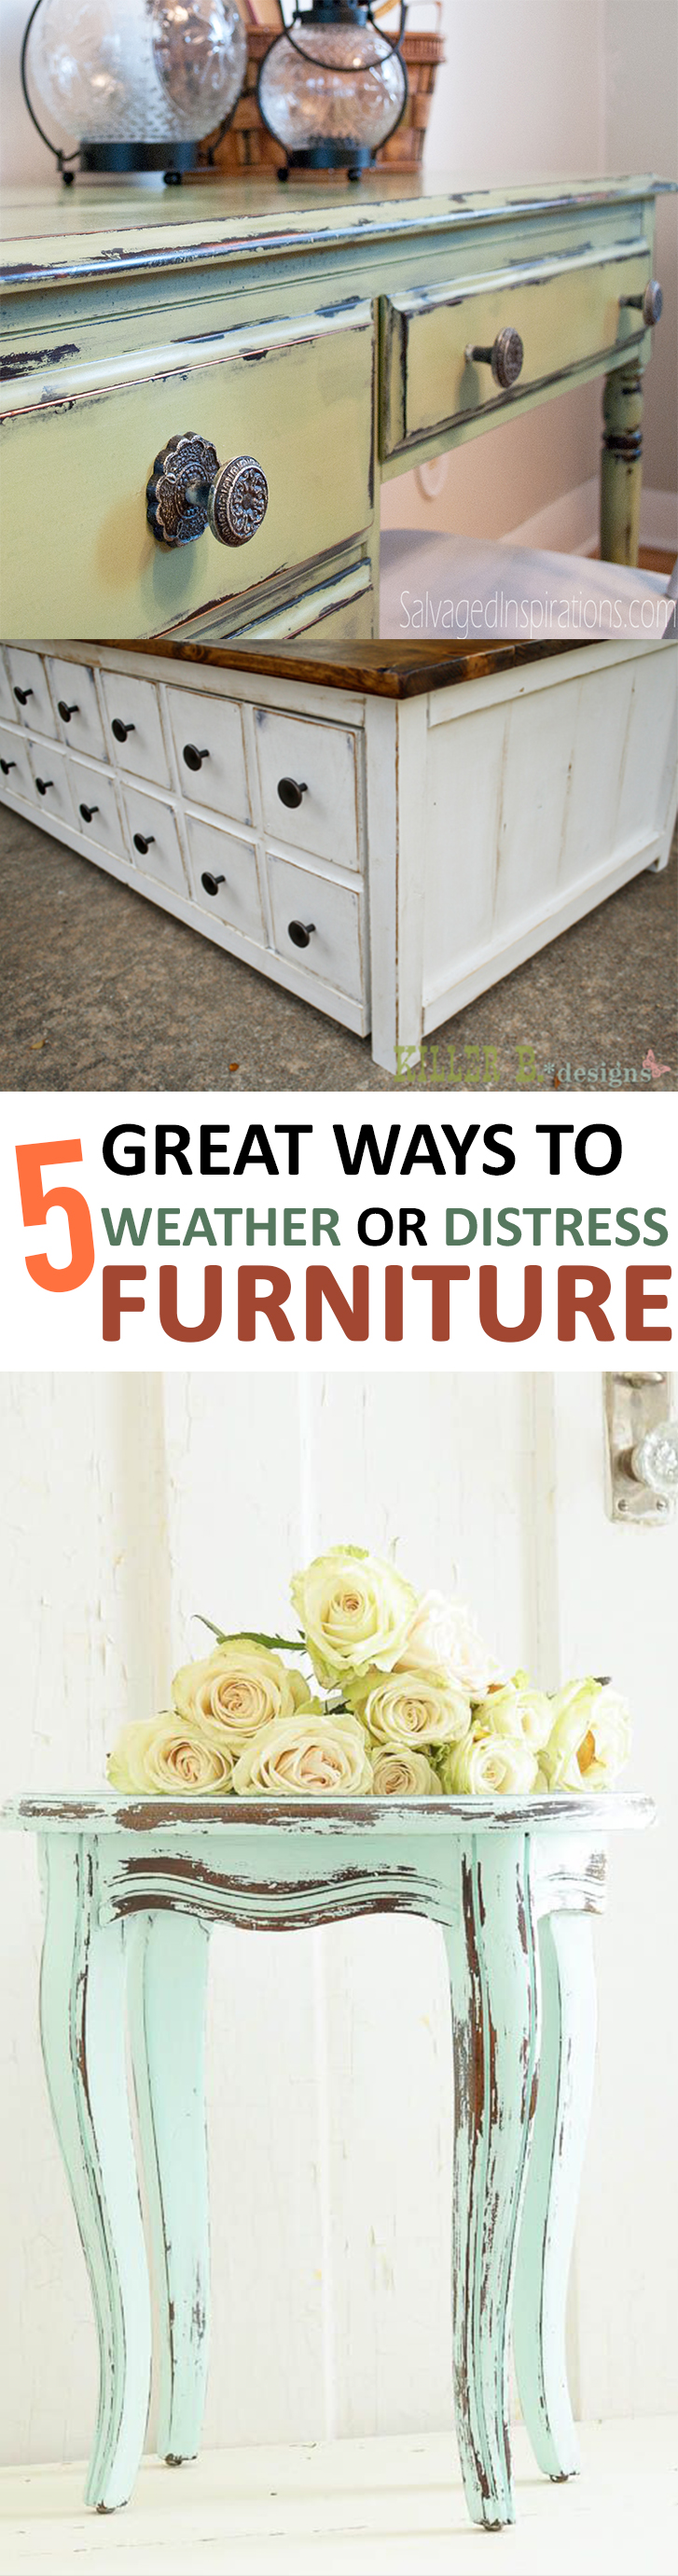 5 Great Ways to Weather or Distress Furniture